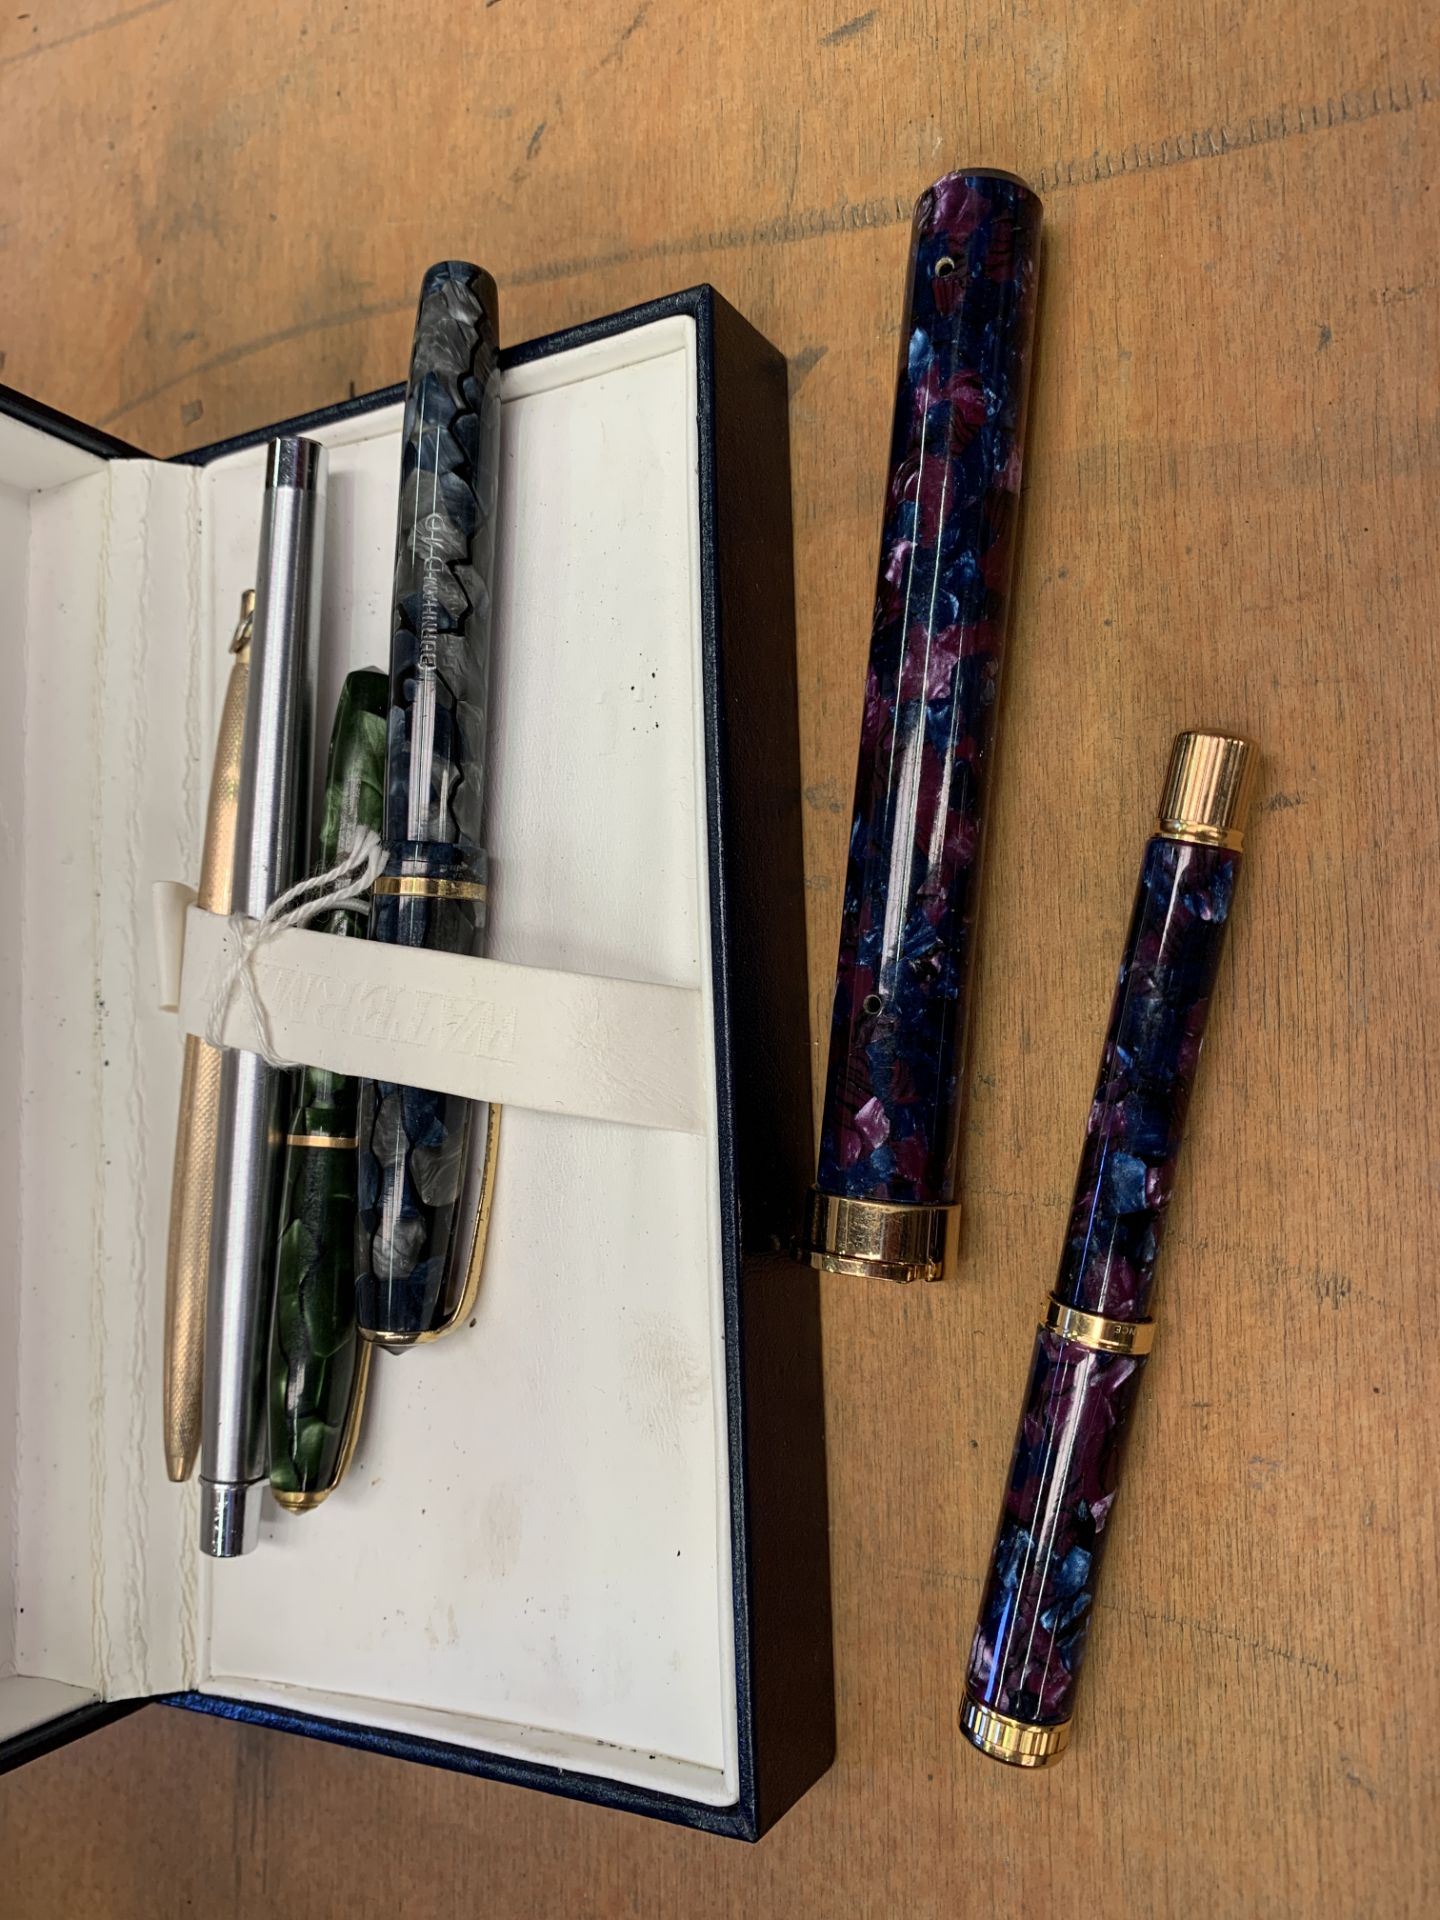 Waterman fountain pen with 18ct gold nib and other pens - Image 2 of 3